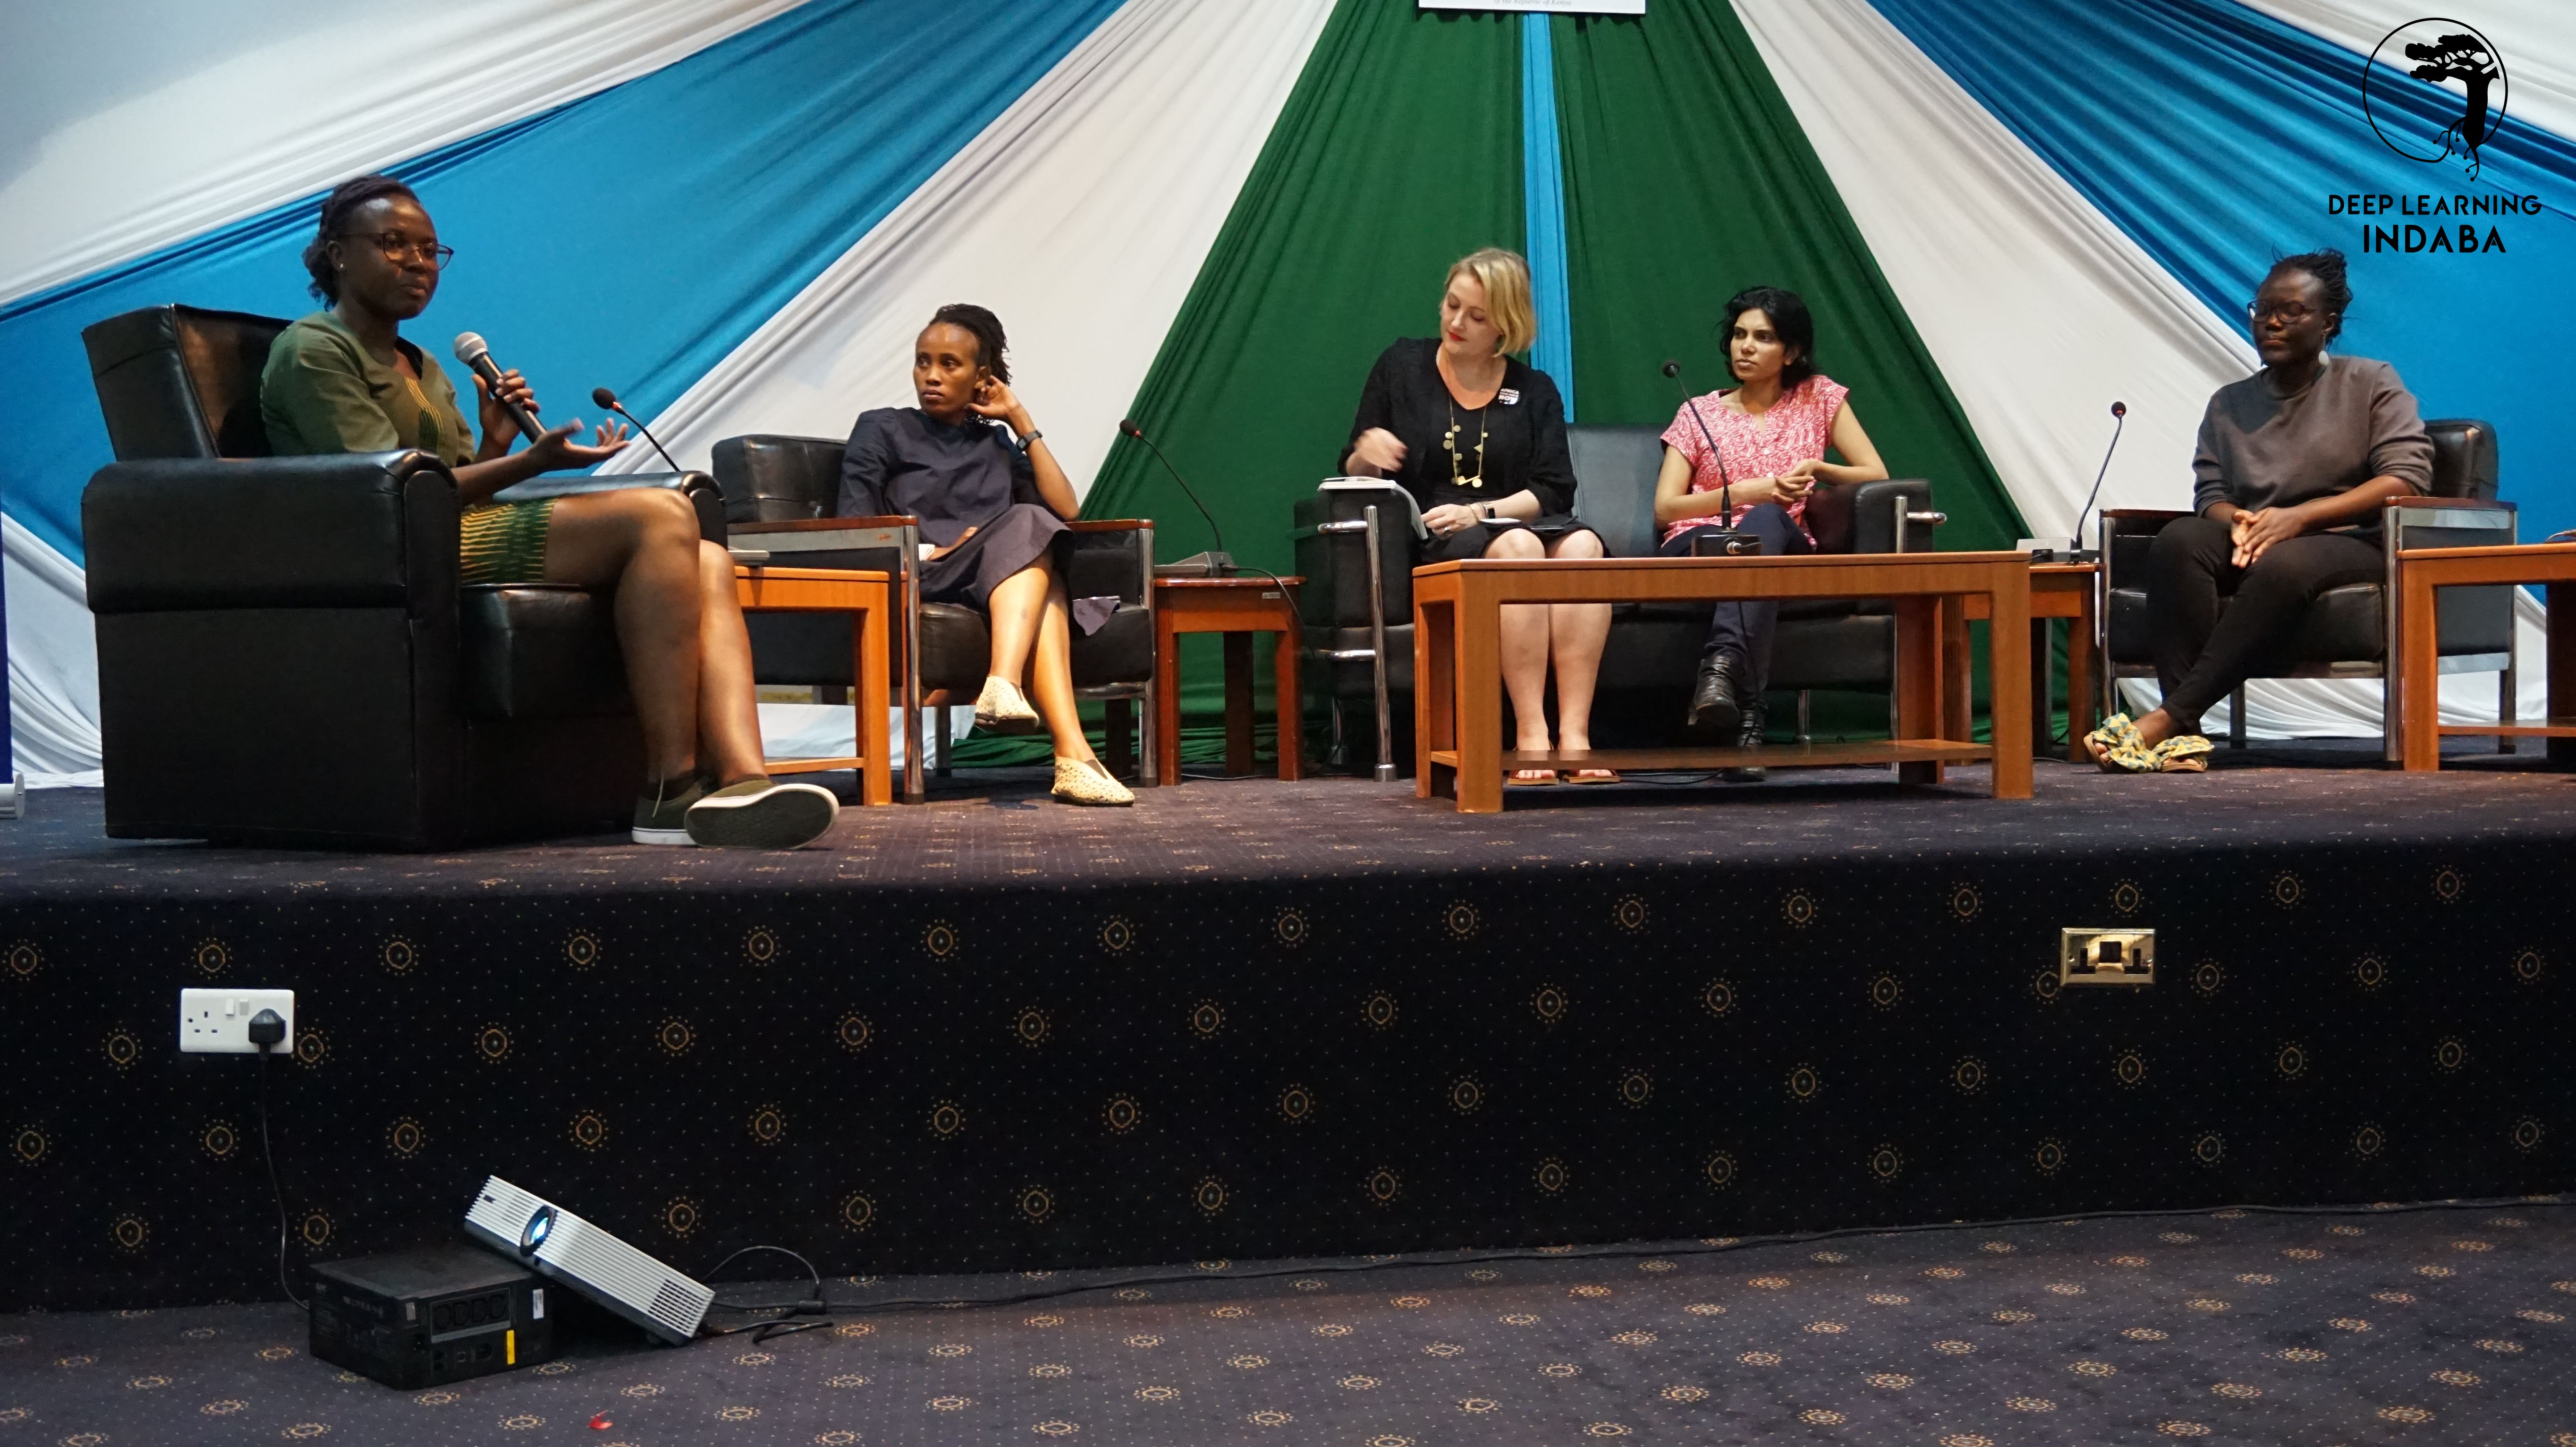 From left to right: Kathleen Siminyu, Grace Mutung’u, Tempest van Schaik, Pashmina Cameron, and Adji Dieng speak about their professional journeys and share advice with attendees during a panel on women in AI during Deep Learning Indaba 2019. Photo credit: Raesetje Sefala and Deep Learning Indaba